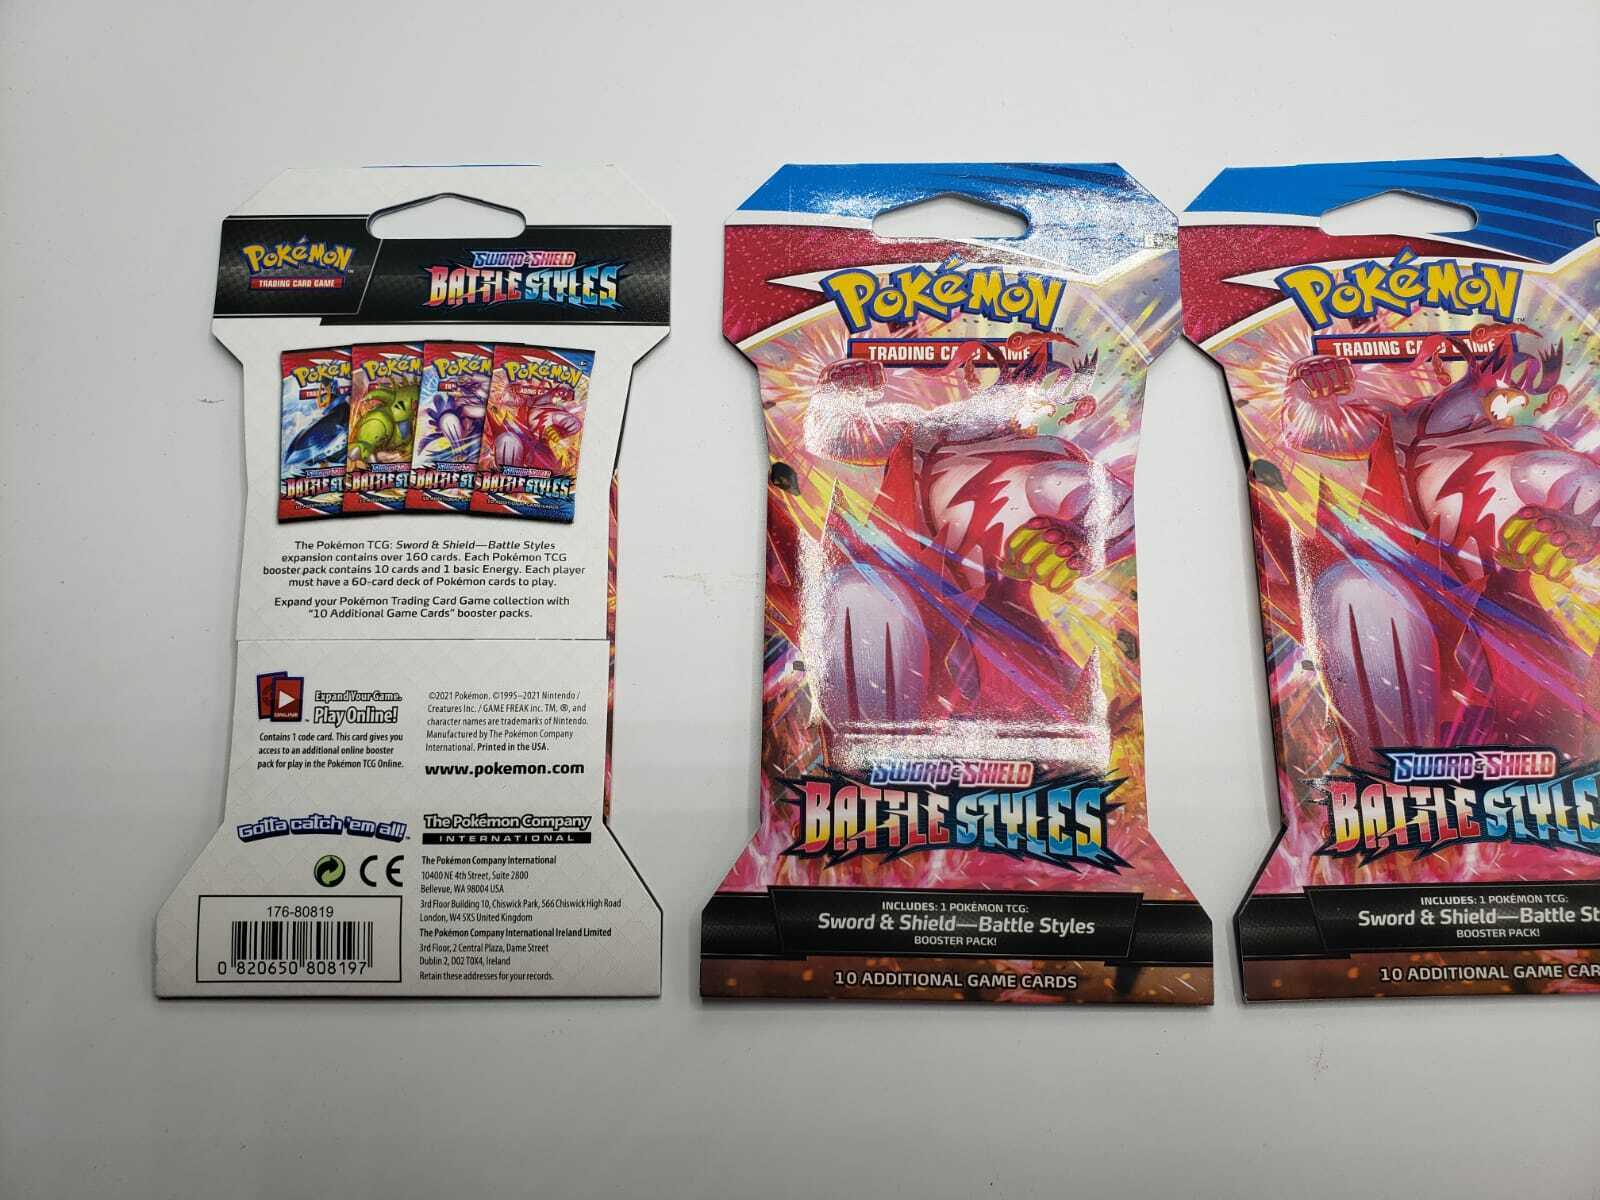 LOT OF 5 Pokemon Sword And Shield Battle Styles Booster Packs x5 Brand New 